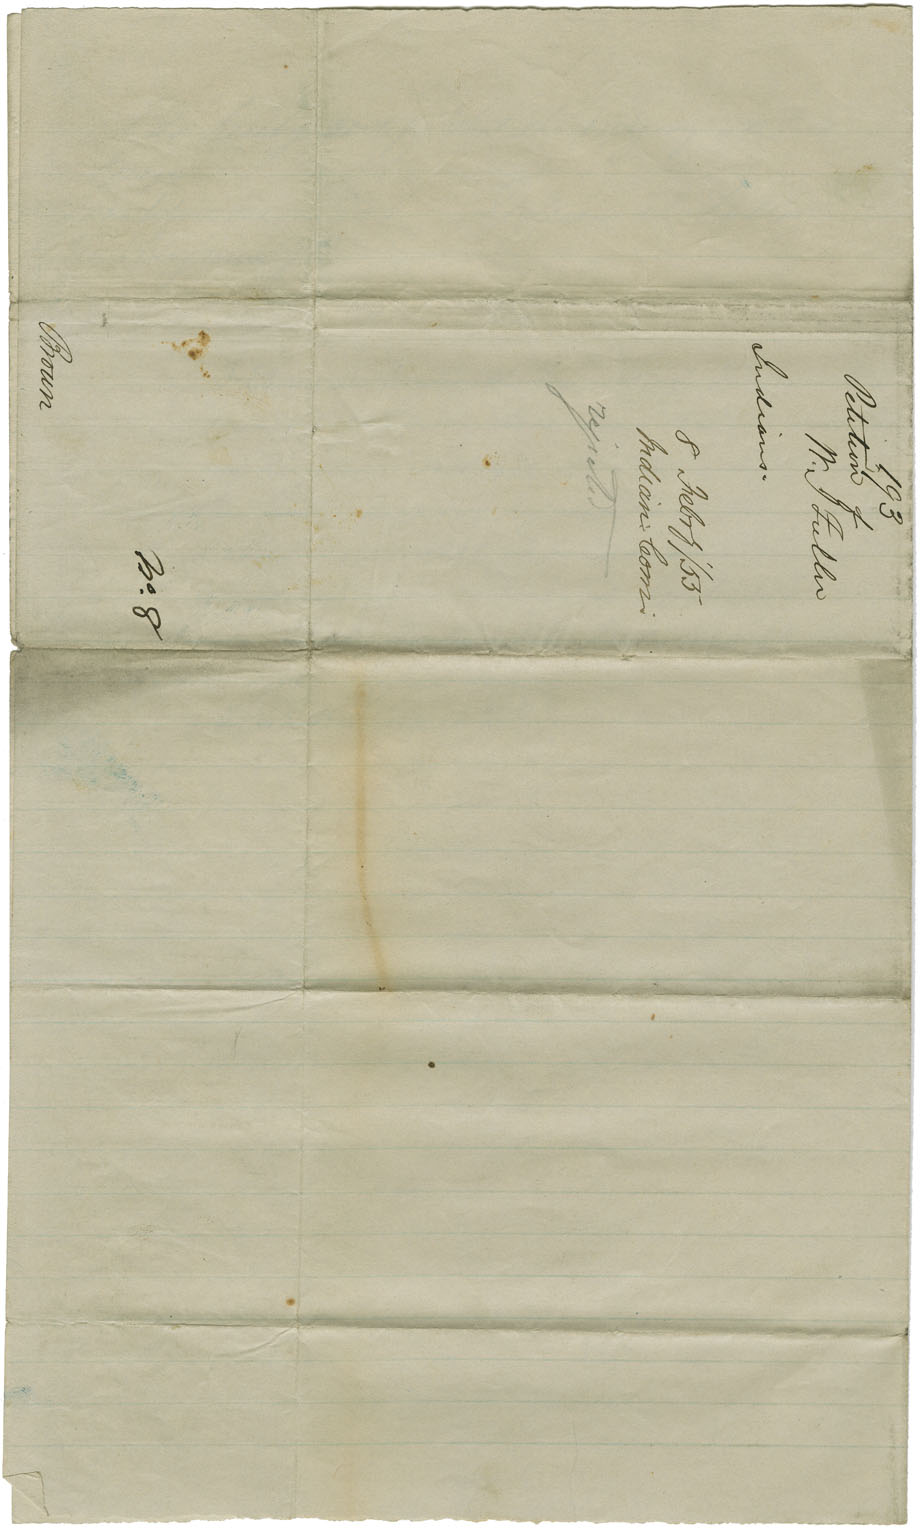 Petition of W.G. Fuller, Kings County, requesting payment for services to Mi'kmaq, especially Peter Toney.